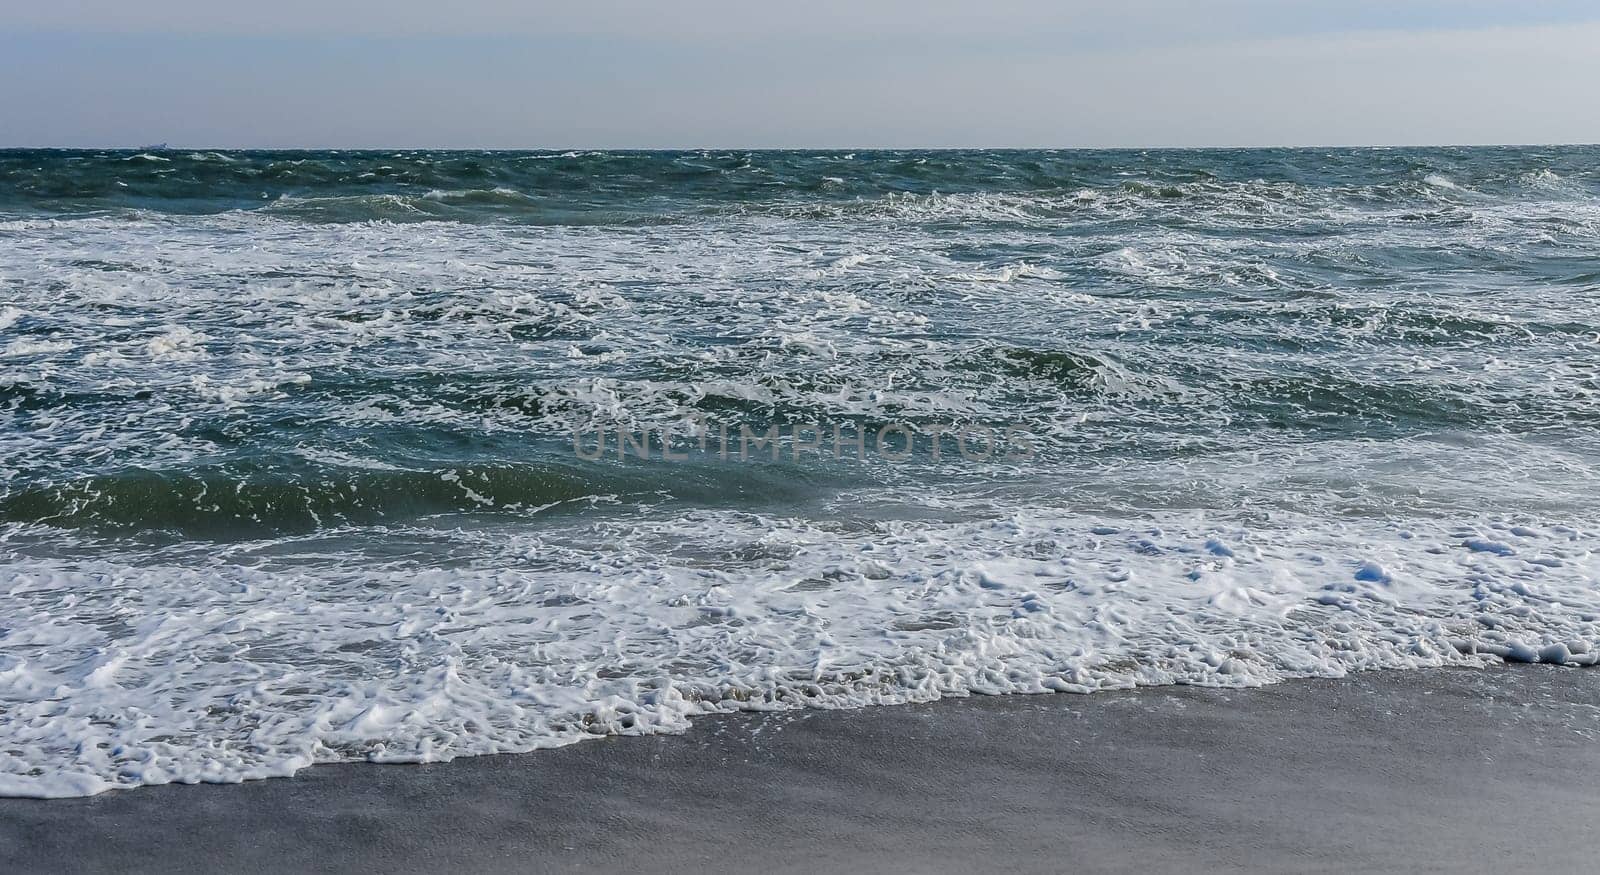 Stormy sea, waves and white foam on the surface, Black Sea by Hydrobiolog